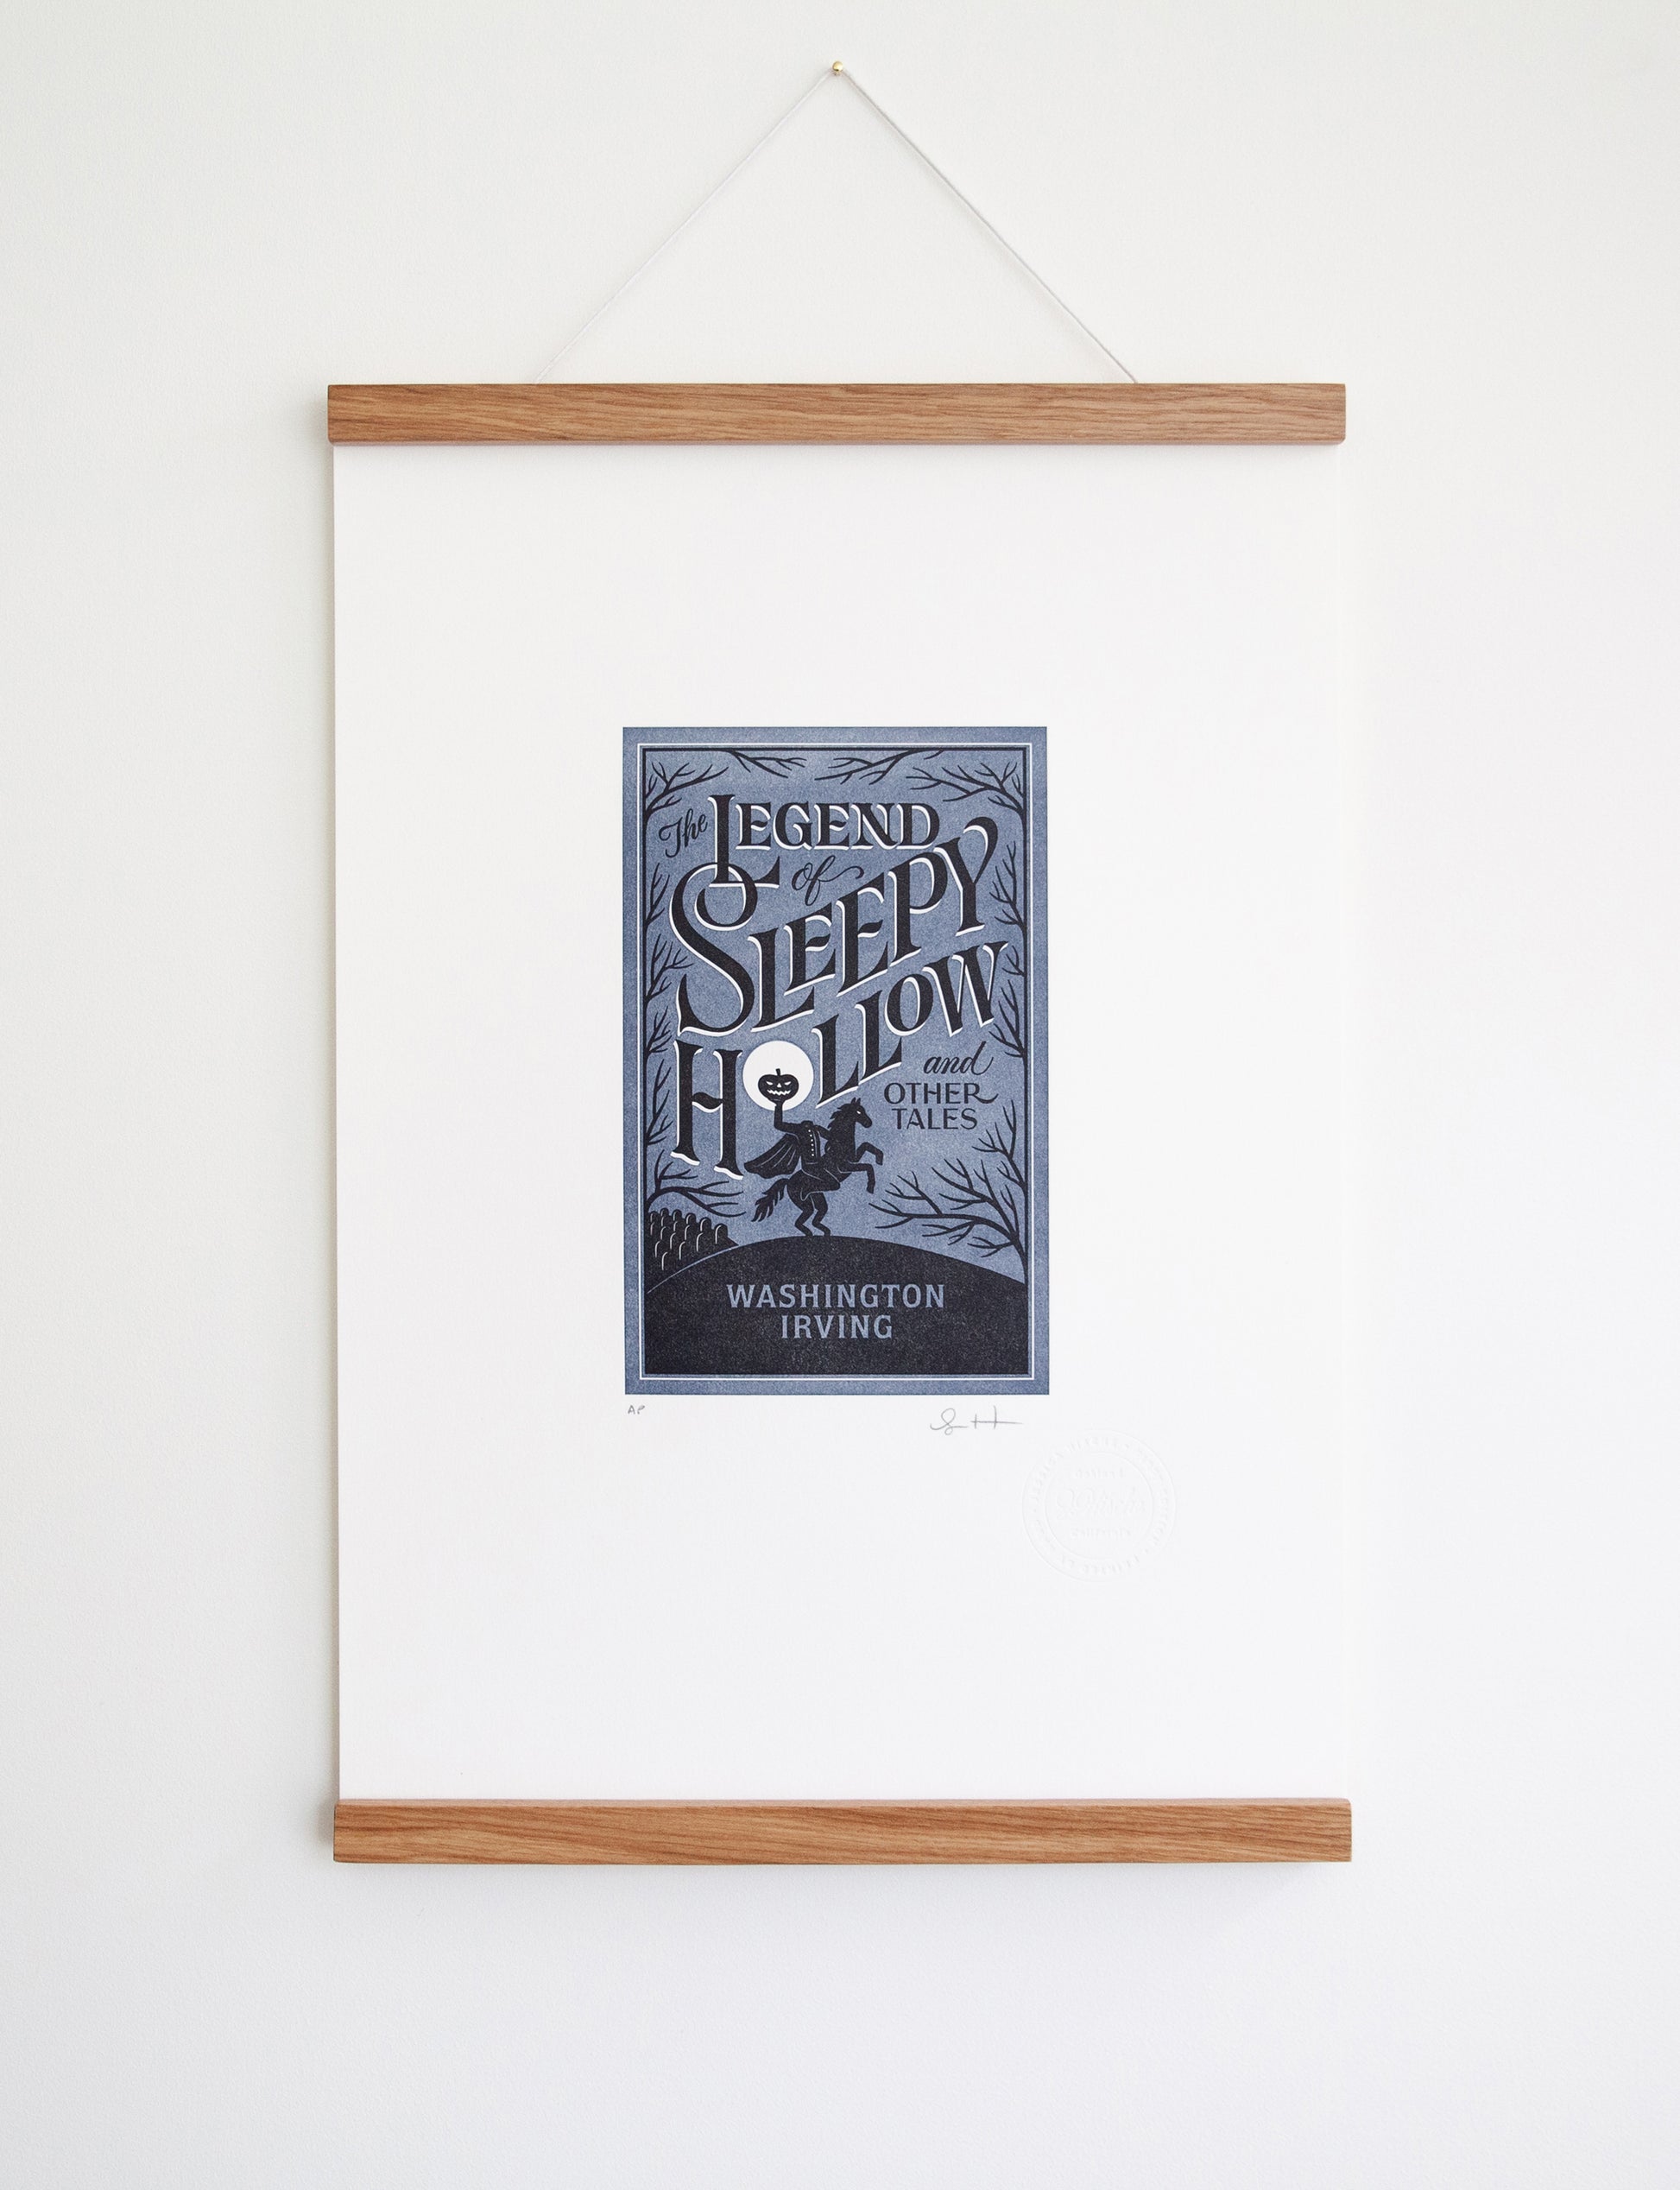 Framed 2-color letterpress print in blue and black. Printed artwork is an illustrated book cover of The Legend of Sleepy Hollow including custom hand lettering.